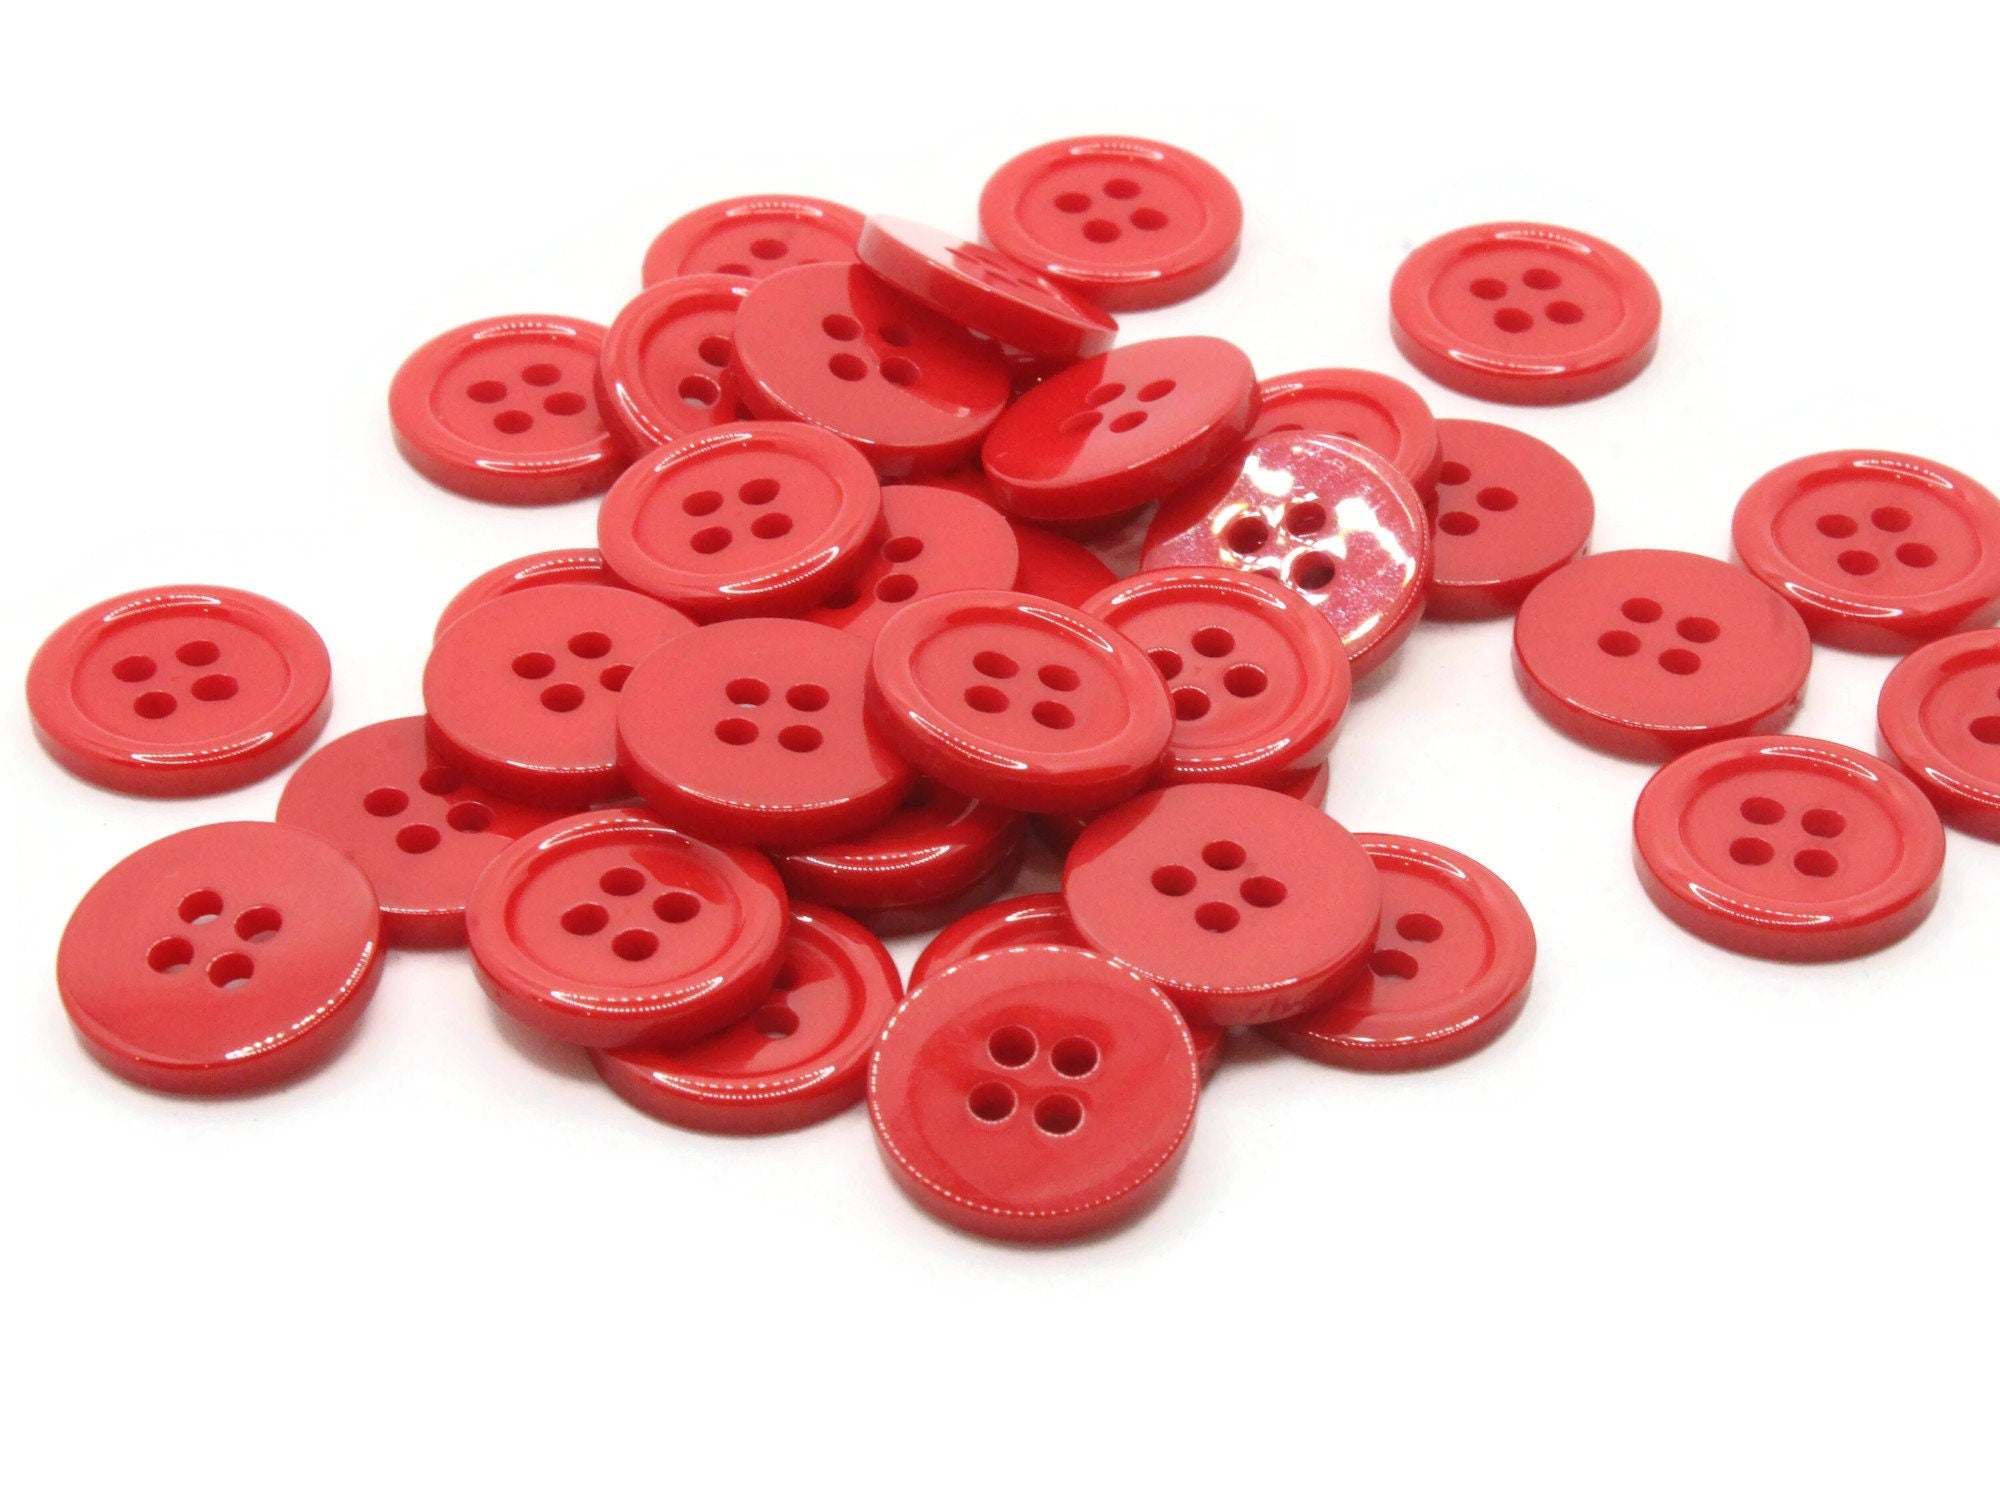 12 Pcs Red Sewing Buttons 4 Hole Round Buttons 0.4 inch Button for Crafts  16L Plastic Buttons for Sewing 10mm Coral Buttons for Pants Blouse Shirt